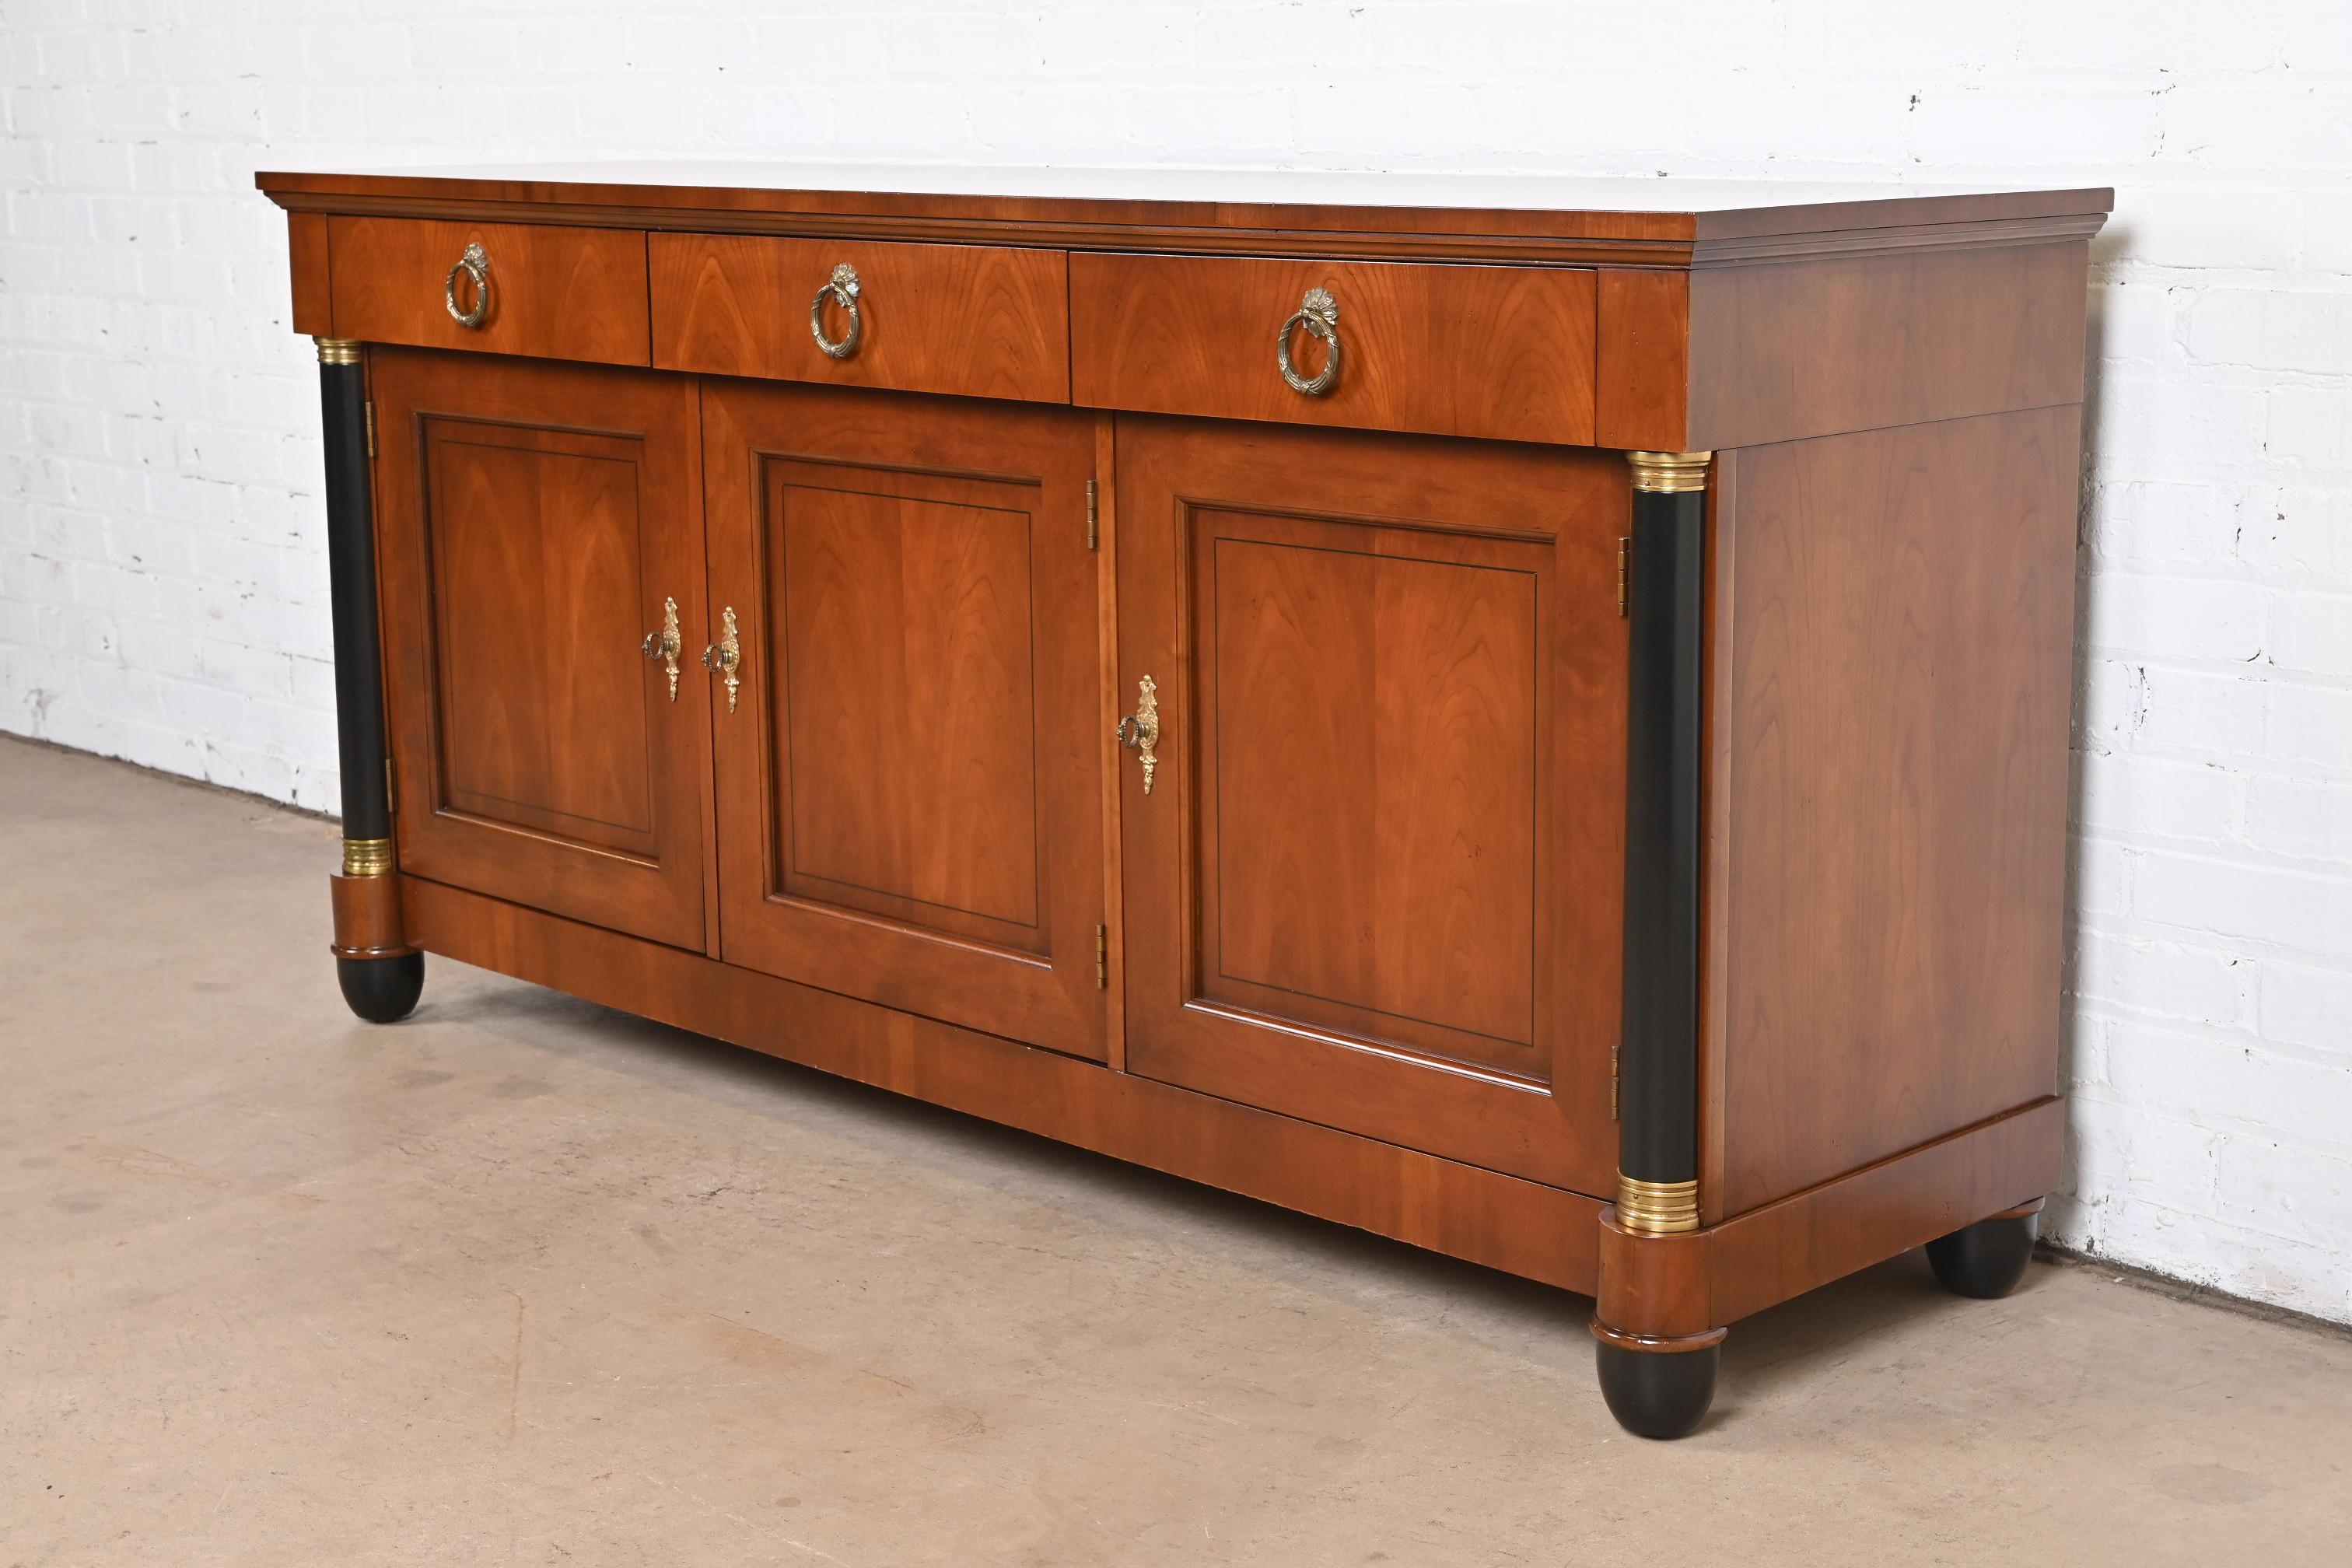 A gorgeous neoclassical or Empire style sideboard, credenza, or bar cabinet

By Baker Furniture, 